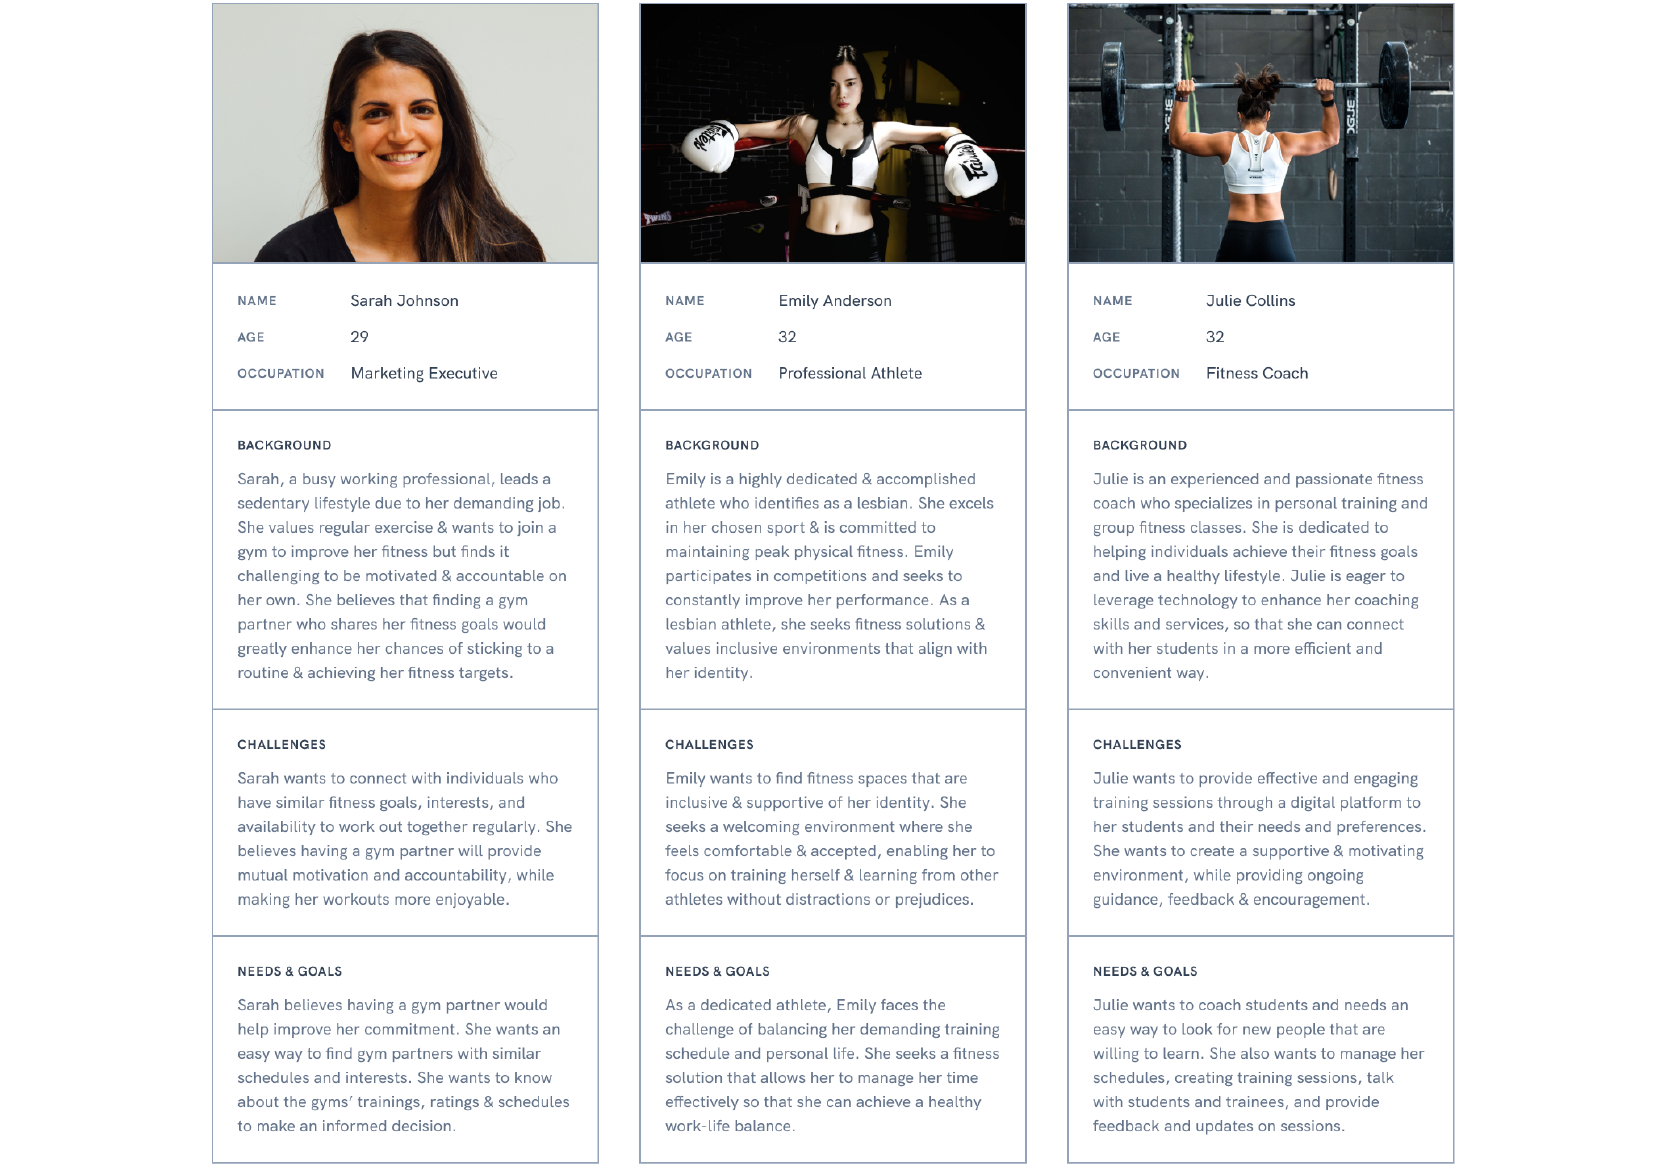 User Persona Example for SportsLink. 3 pictures of 3 women and their introduction, background, challenges, needs & goals.